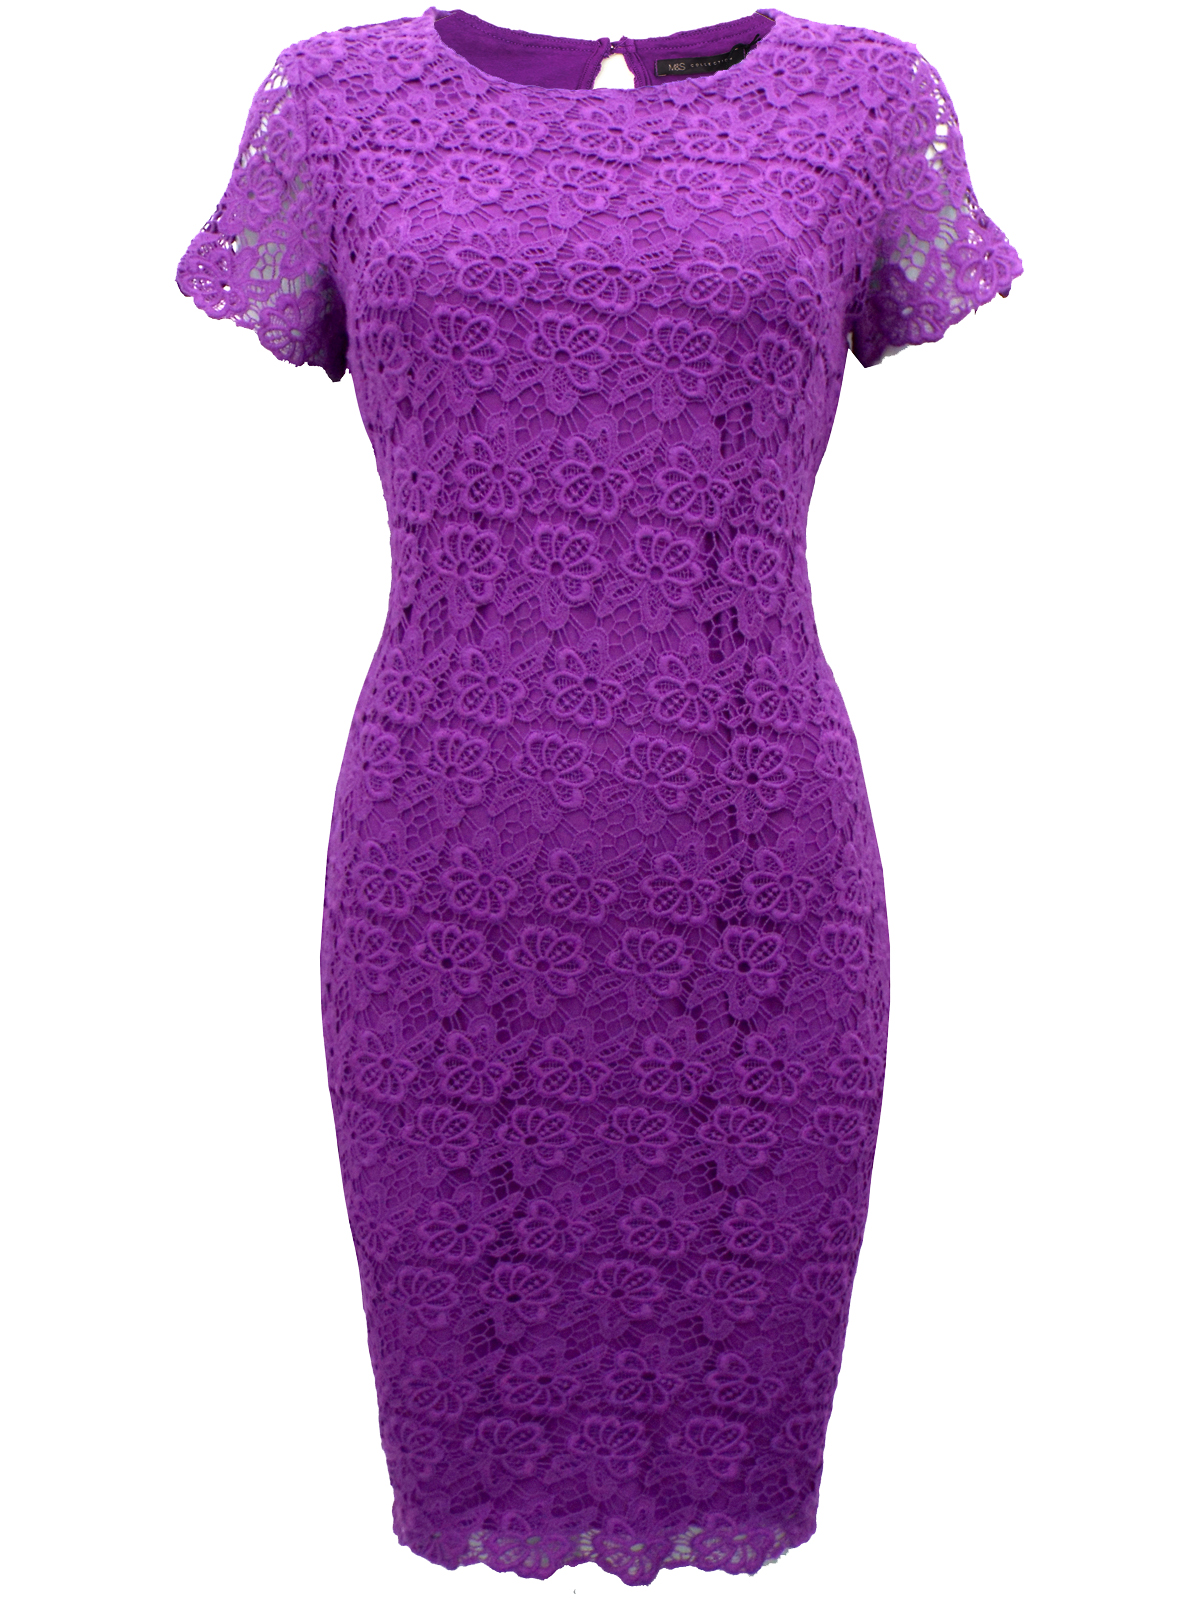 Marks and Spencer - - M&5 PURPLE Pure Cotton Crochet Lace Shift Dress ...